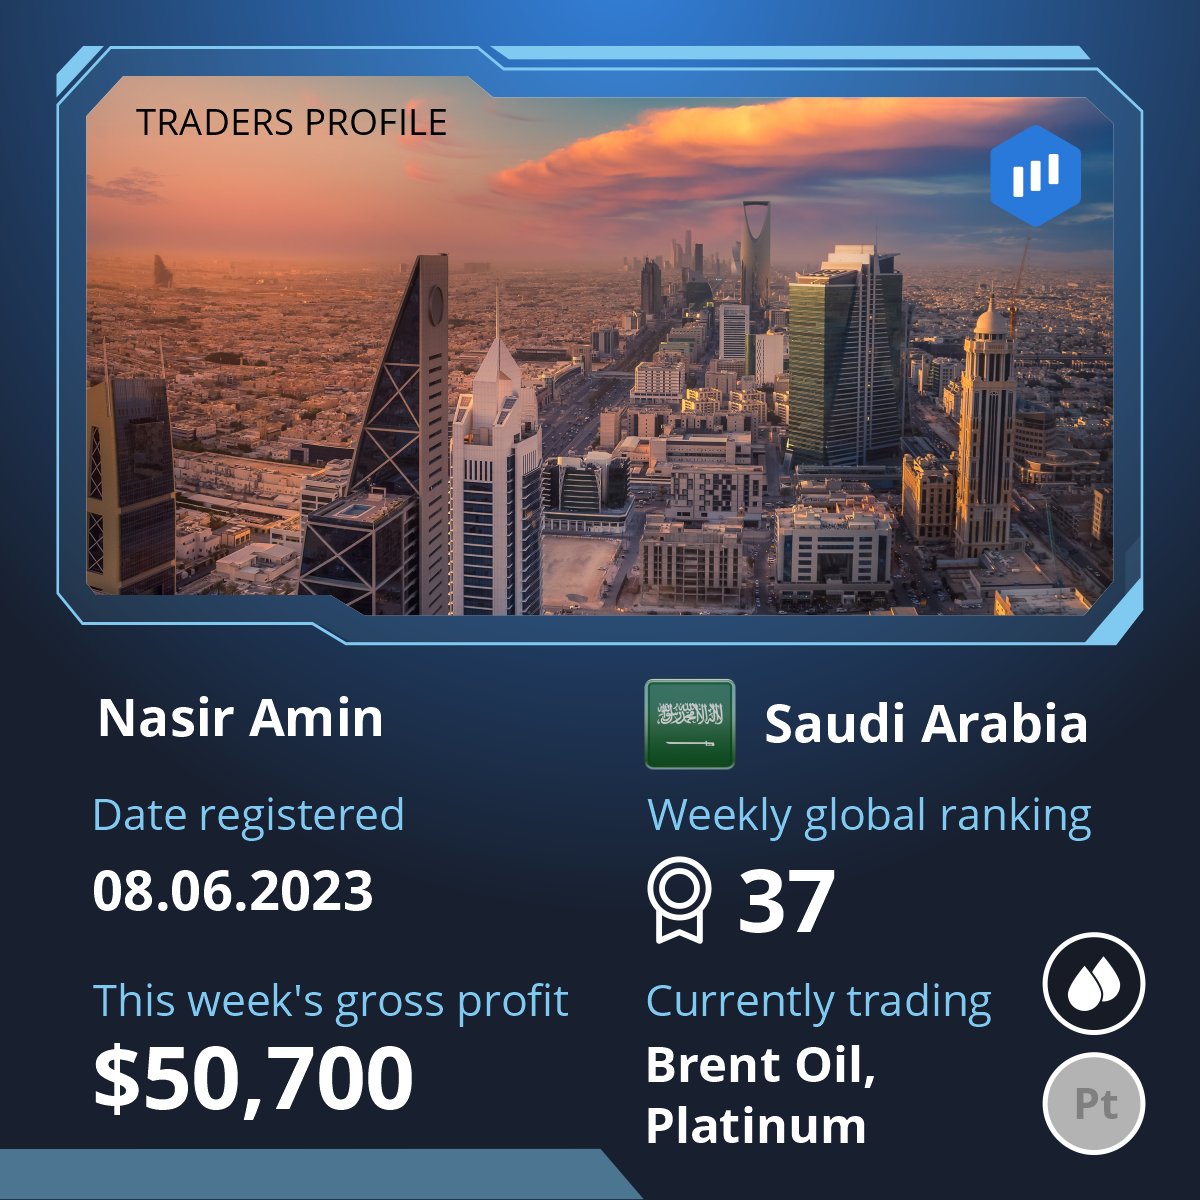 Explore profitable assets with this Saudi trader’s profile! Uncover his wins on Brent Oil and Platinum, making smart moves to ride the uptrends and cash in on profits.

Start Earning Today: eo.xyz/bcxf00